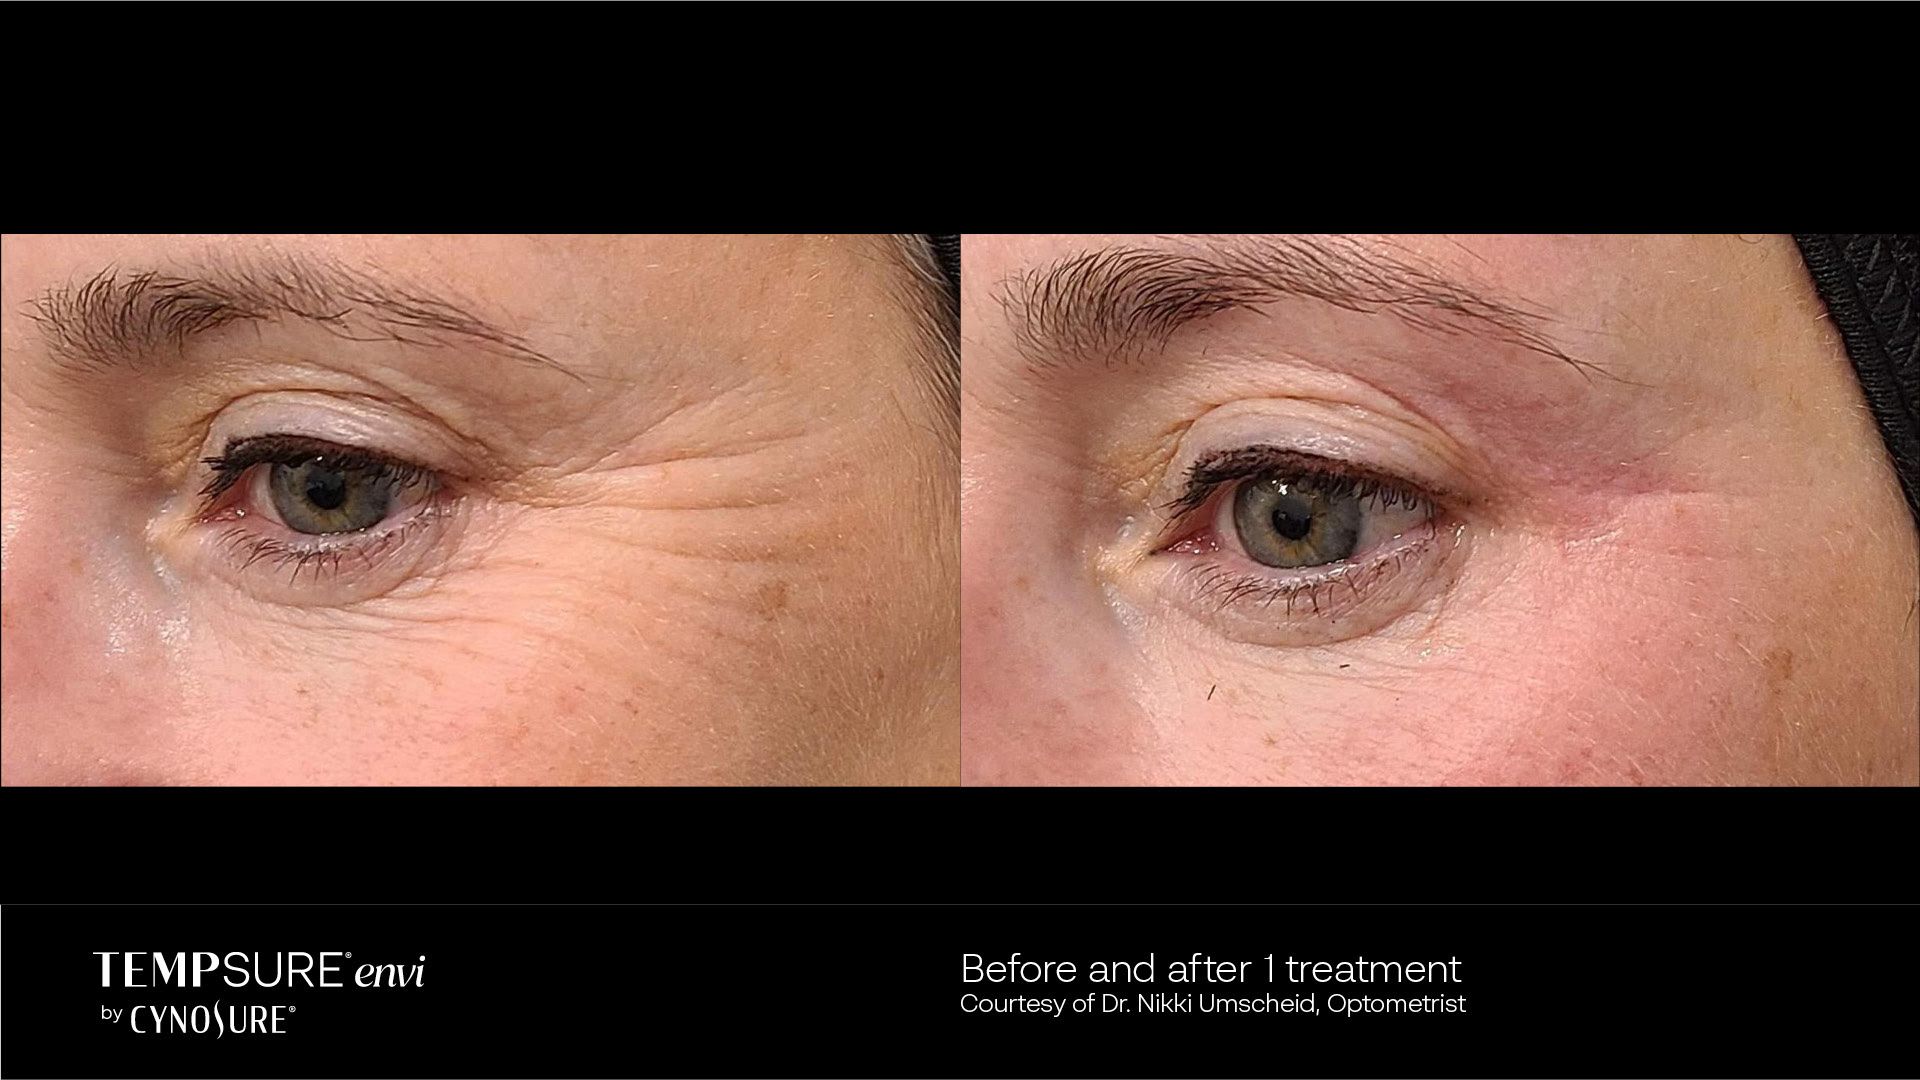 Before & after of Tempsure Envi treatment for dry eye at Positive Eye Ons in CA